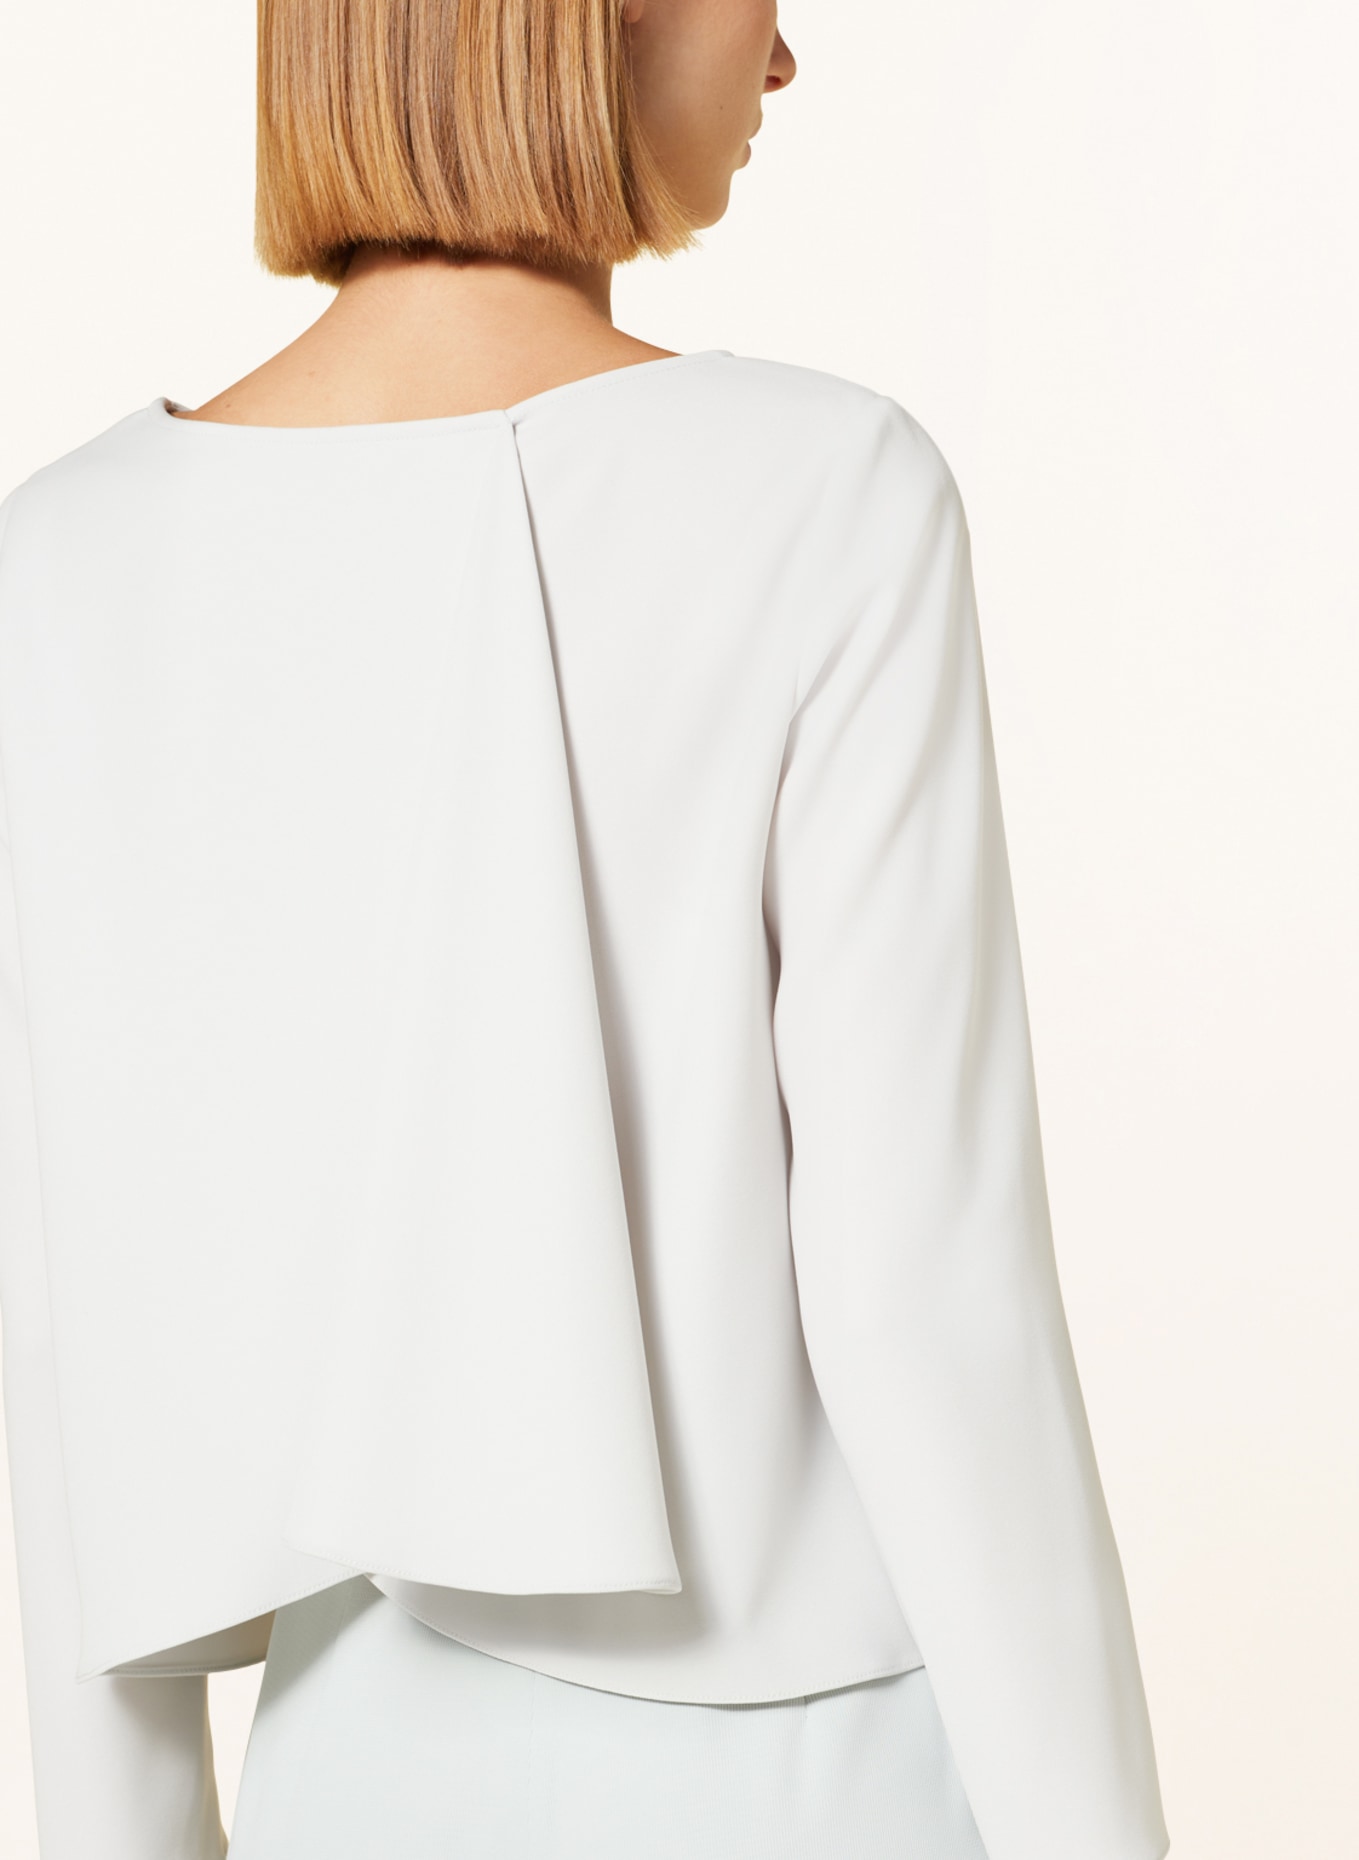 EMPORIO ARMANI Shirt blouse with 3/4 sleeves, Color: LIGHT GRAY (Image 4)